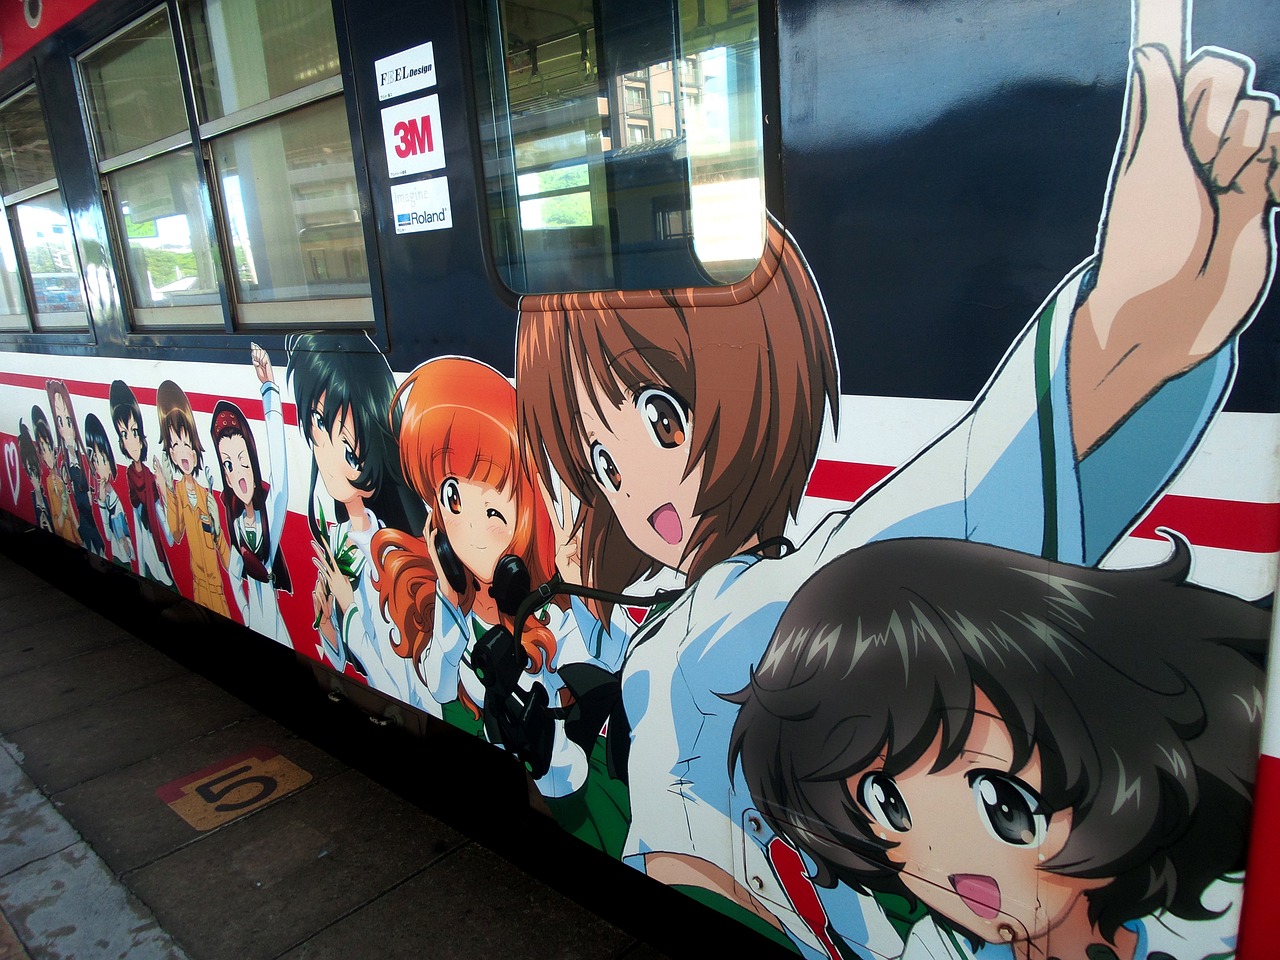 Is Japan Popular Because of Anime?